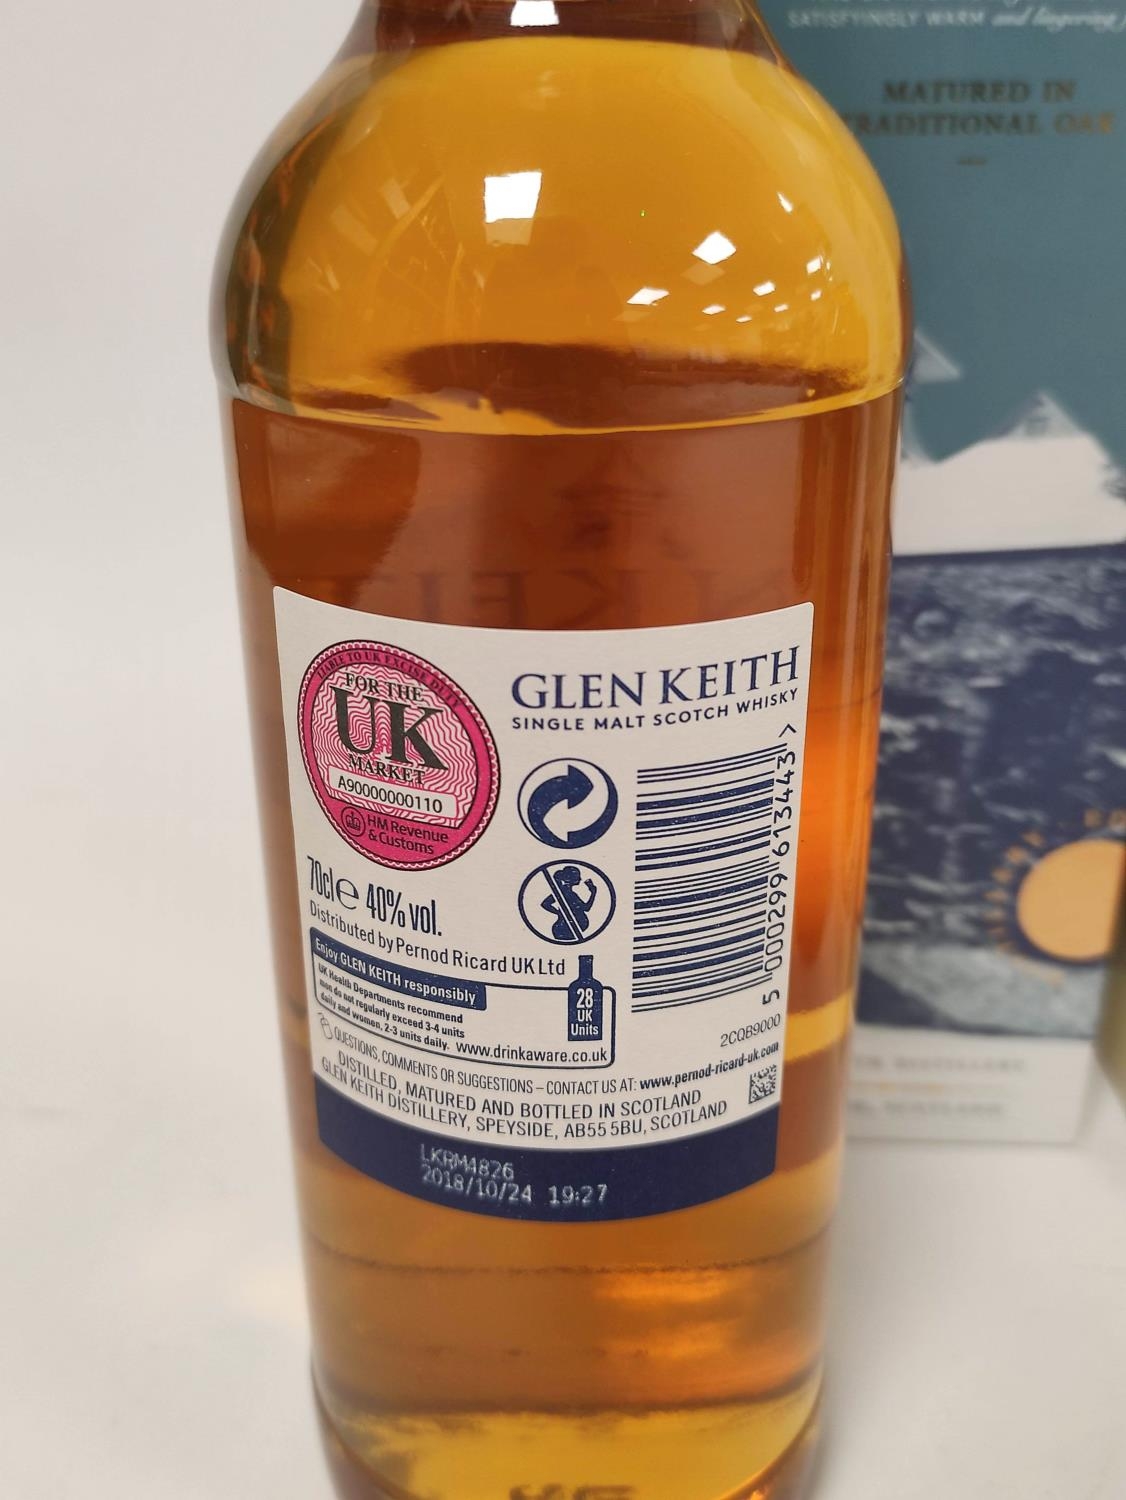 Glen Keith Distillery Edition single malt Scotch whisky, 70cl, 40% vol, boxed, with Cragganmore 12 - Image 7 of 7